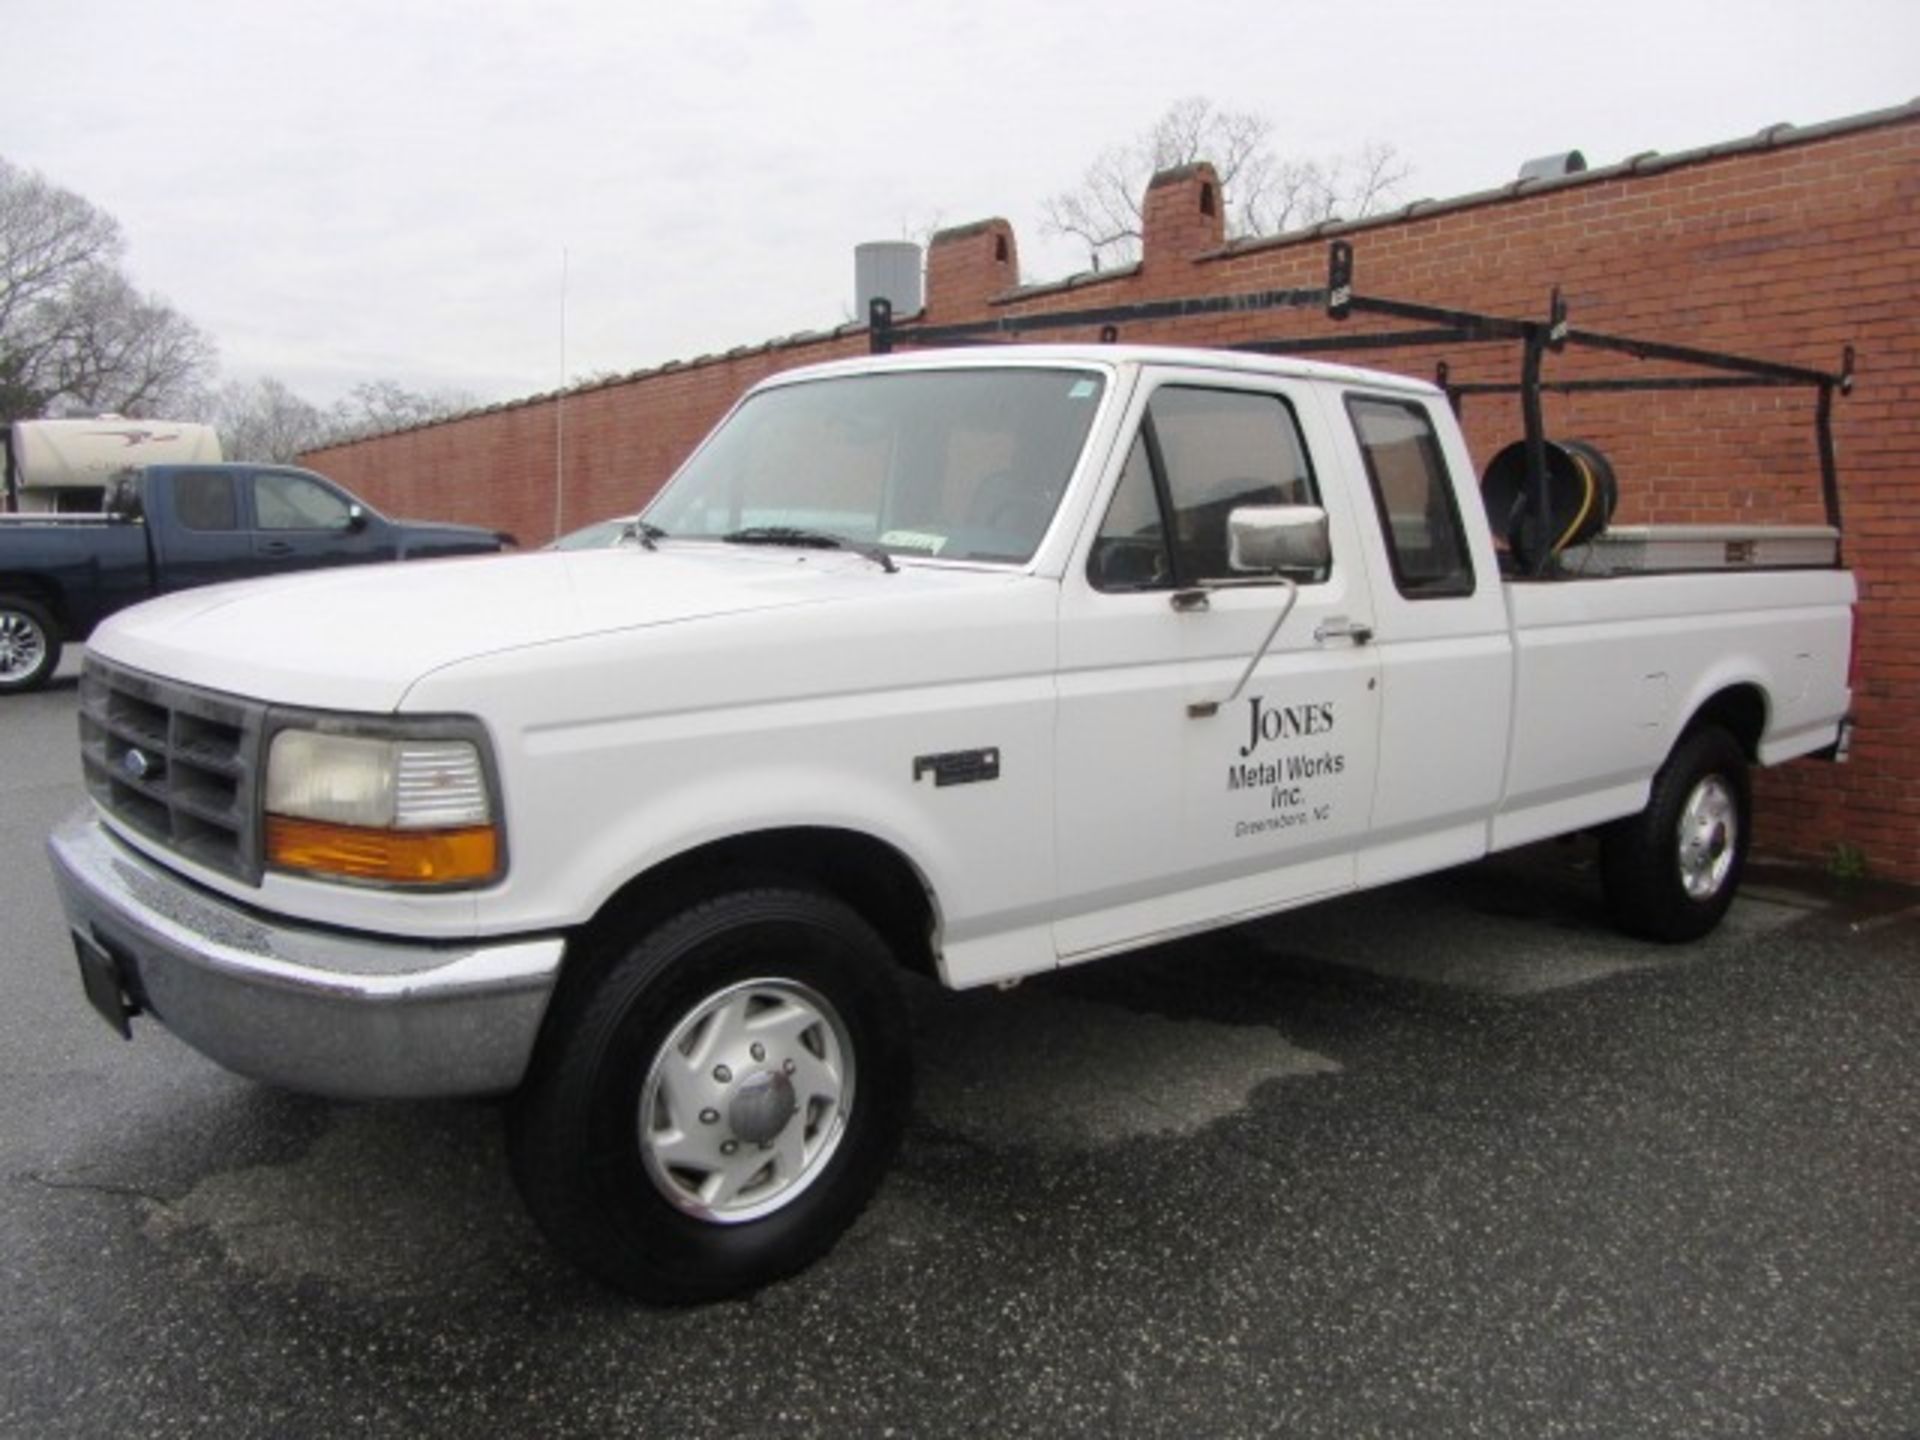 Ford F250 Heavy Duty Pick-Up Truck with Extended Cab, Aluminum Work Boxes, Work Bed, Dual Gas Tanks,